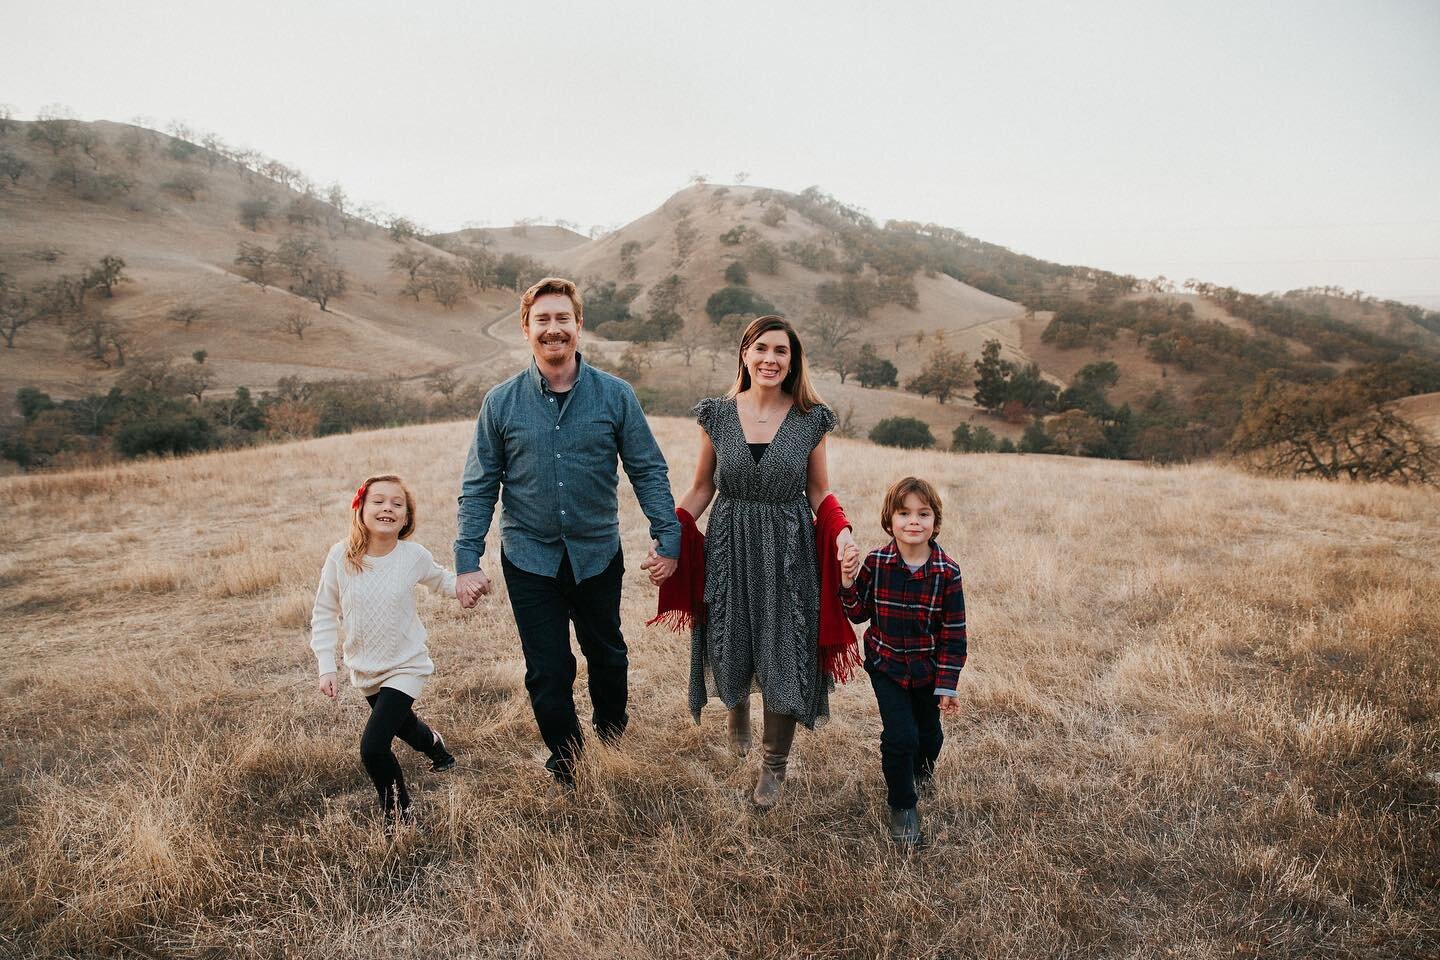 Rolling hills and fun families. 

#bayareaphotographer
#napafamilyphotographer #bayarealifestylephotographer
#lifestylephotographer
#sanfranciscofamilyphotographer #sonomacountyphotographer
#clickinmoms
#pleasantonphotographer
#lafayettephotographer
